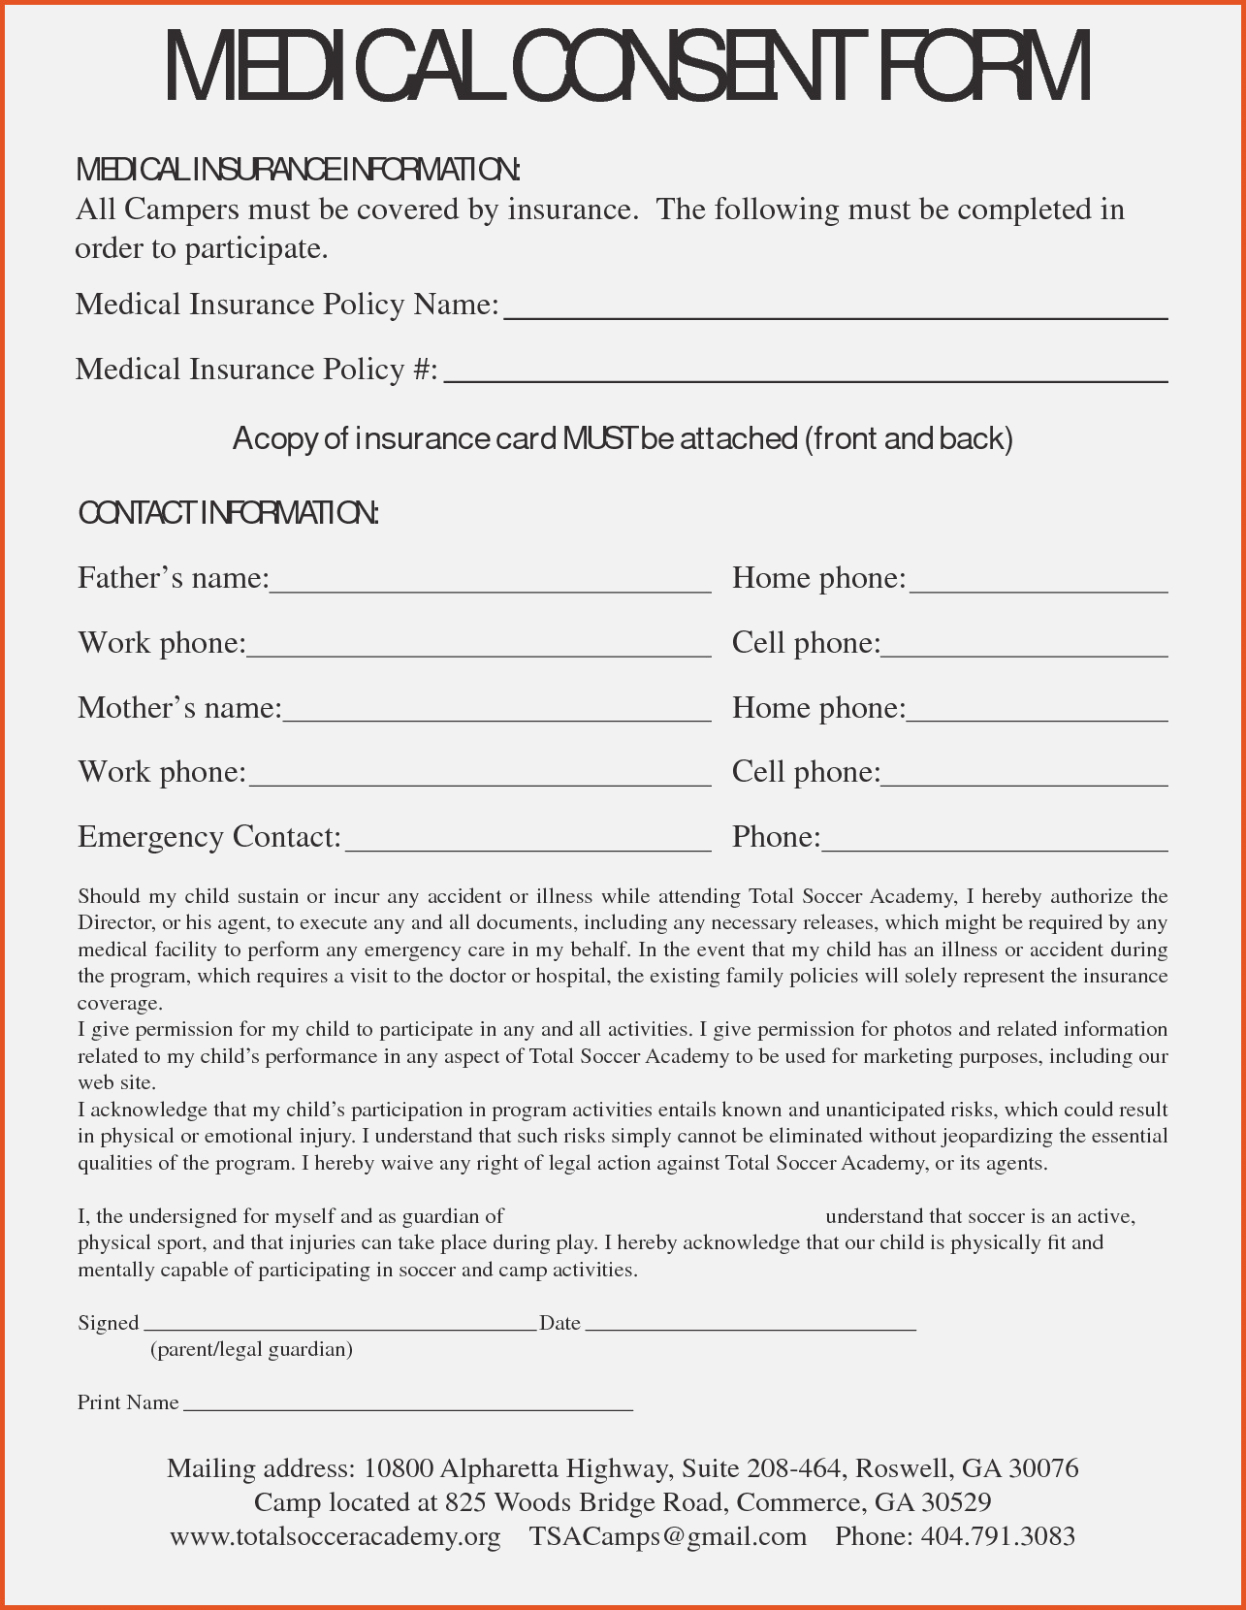 printable-medical-consent-form-word-printable-forms-free-online